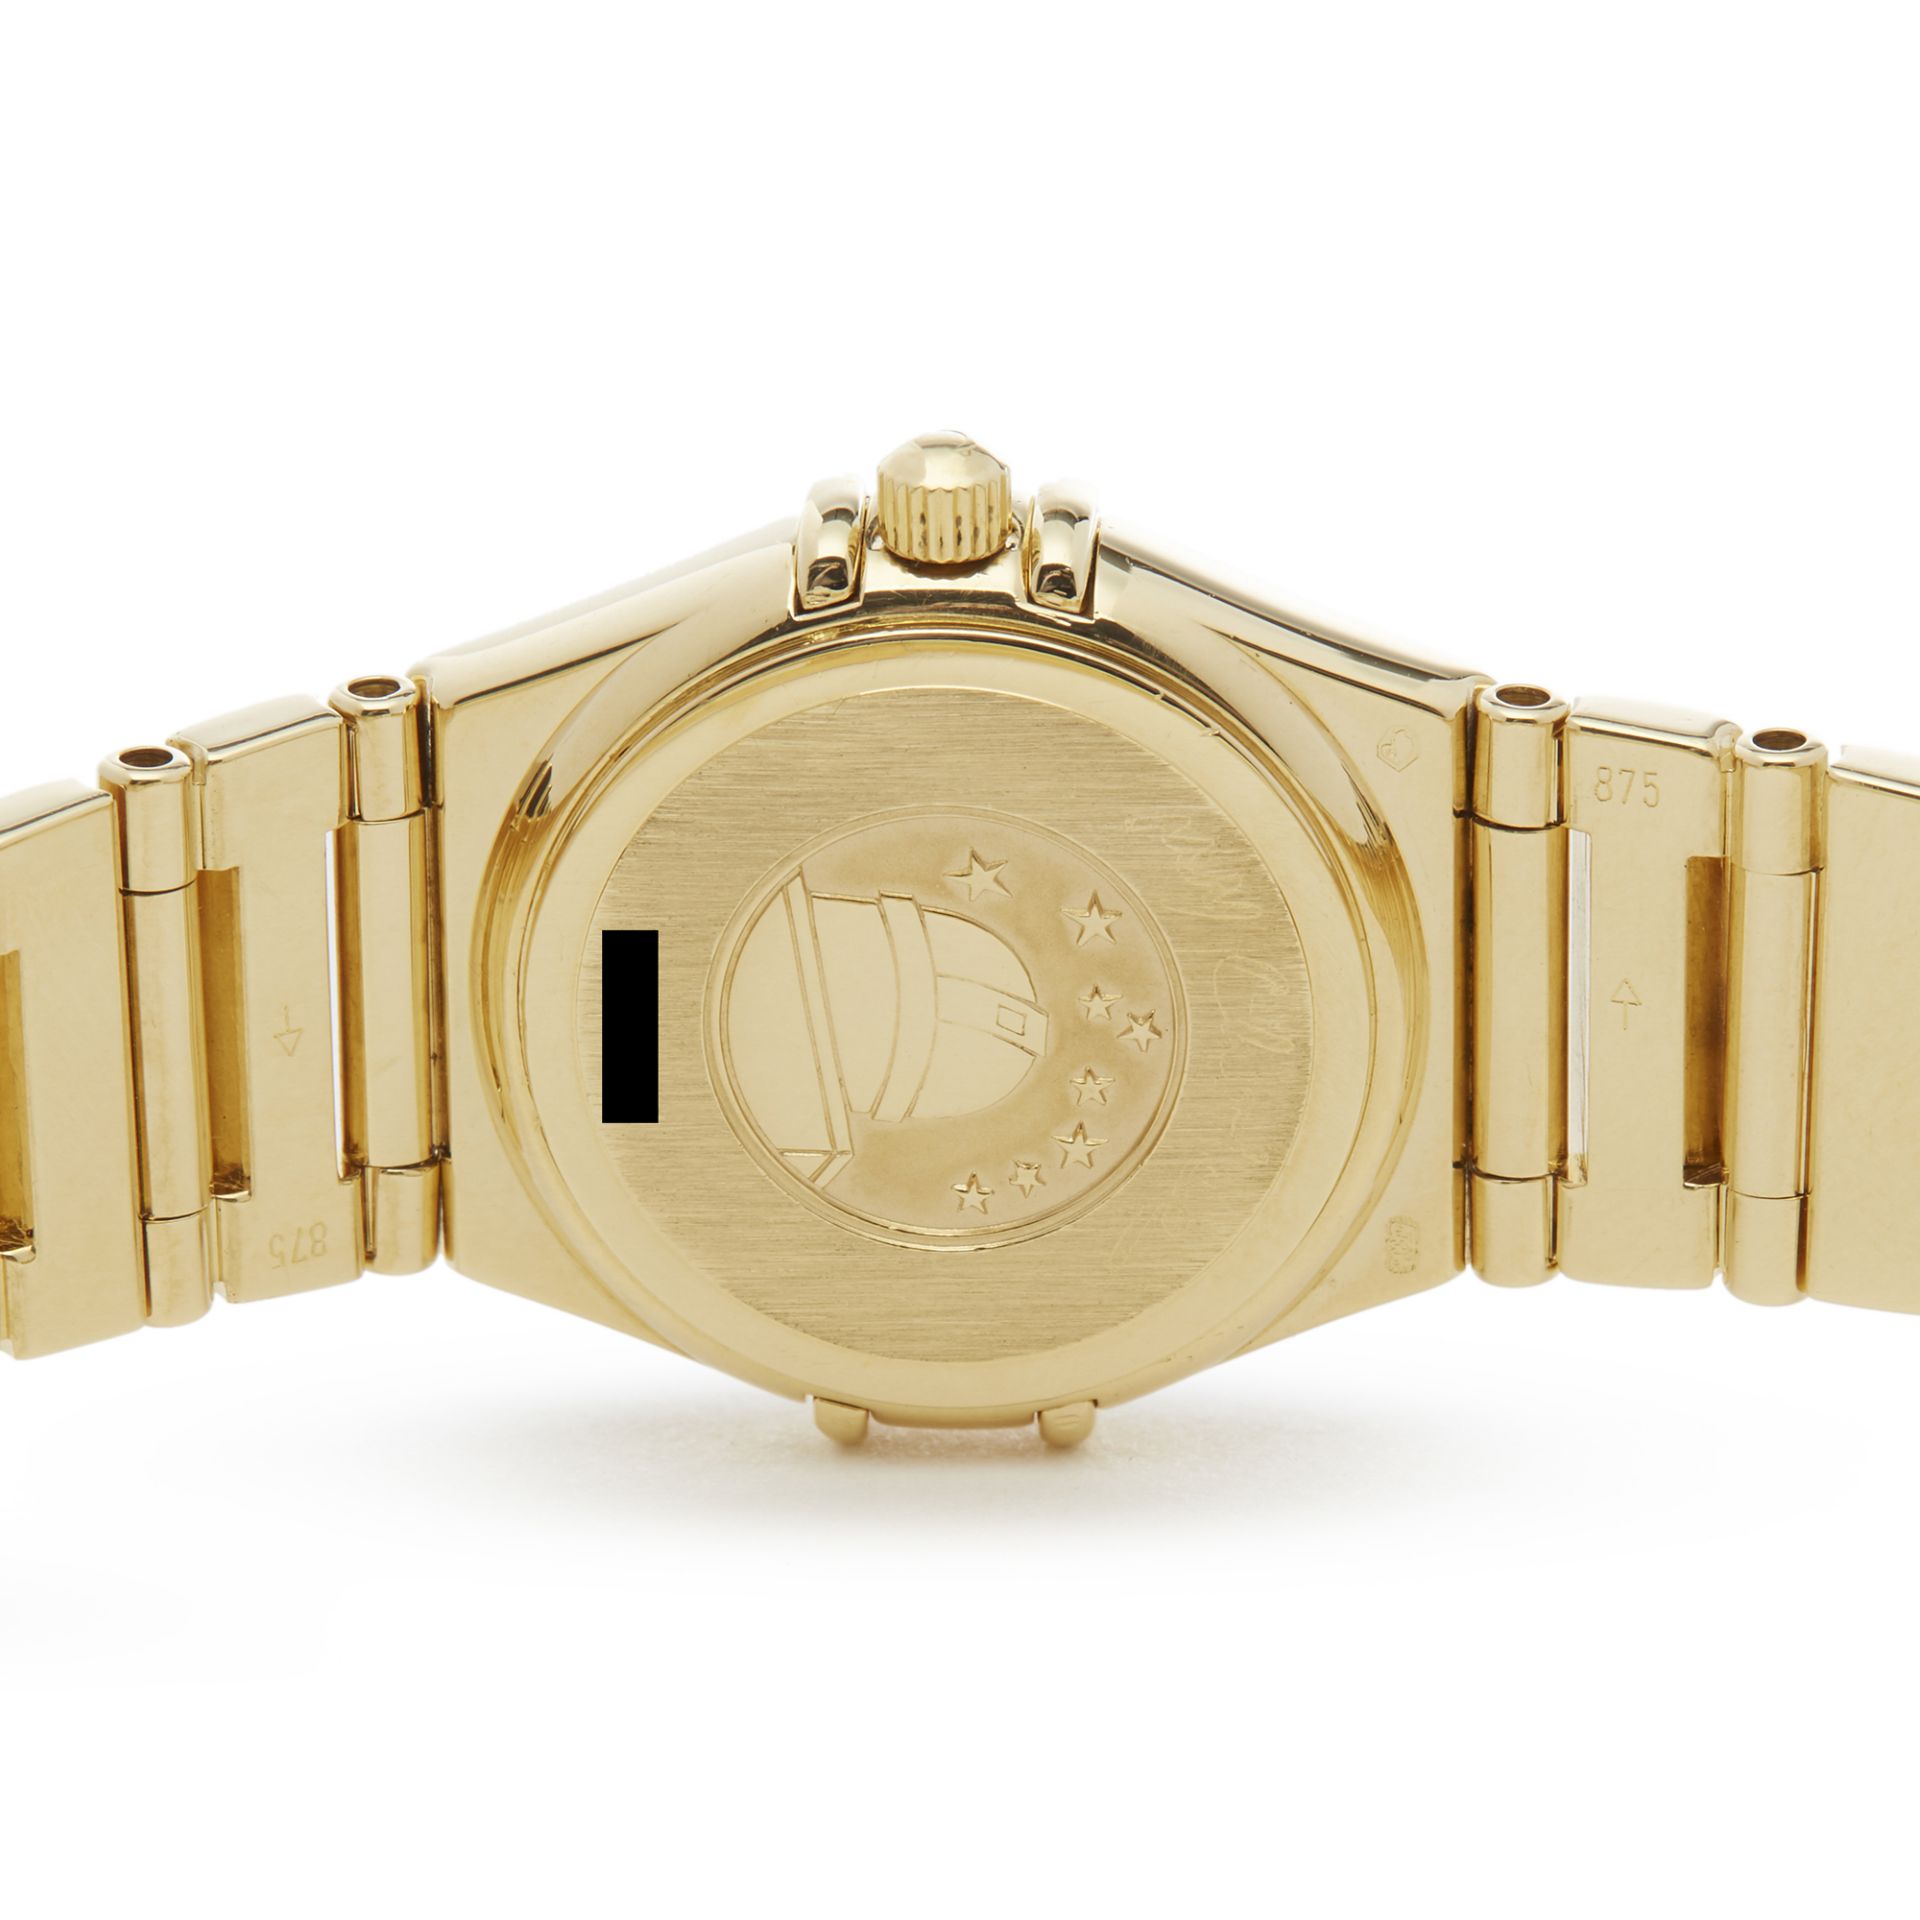 Omega Constellation Diamond Mother of Pearl 18k Yellow Gold - 11647500 - Image 3 of 7